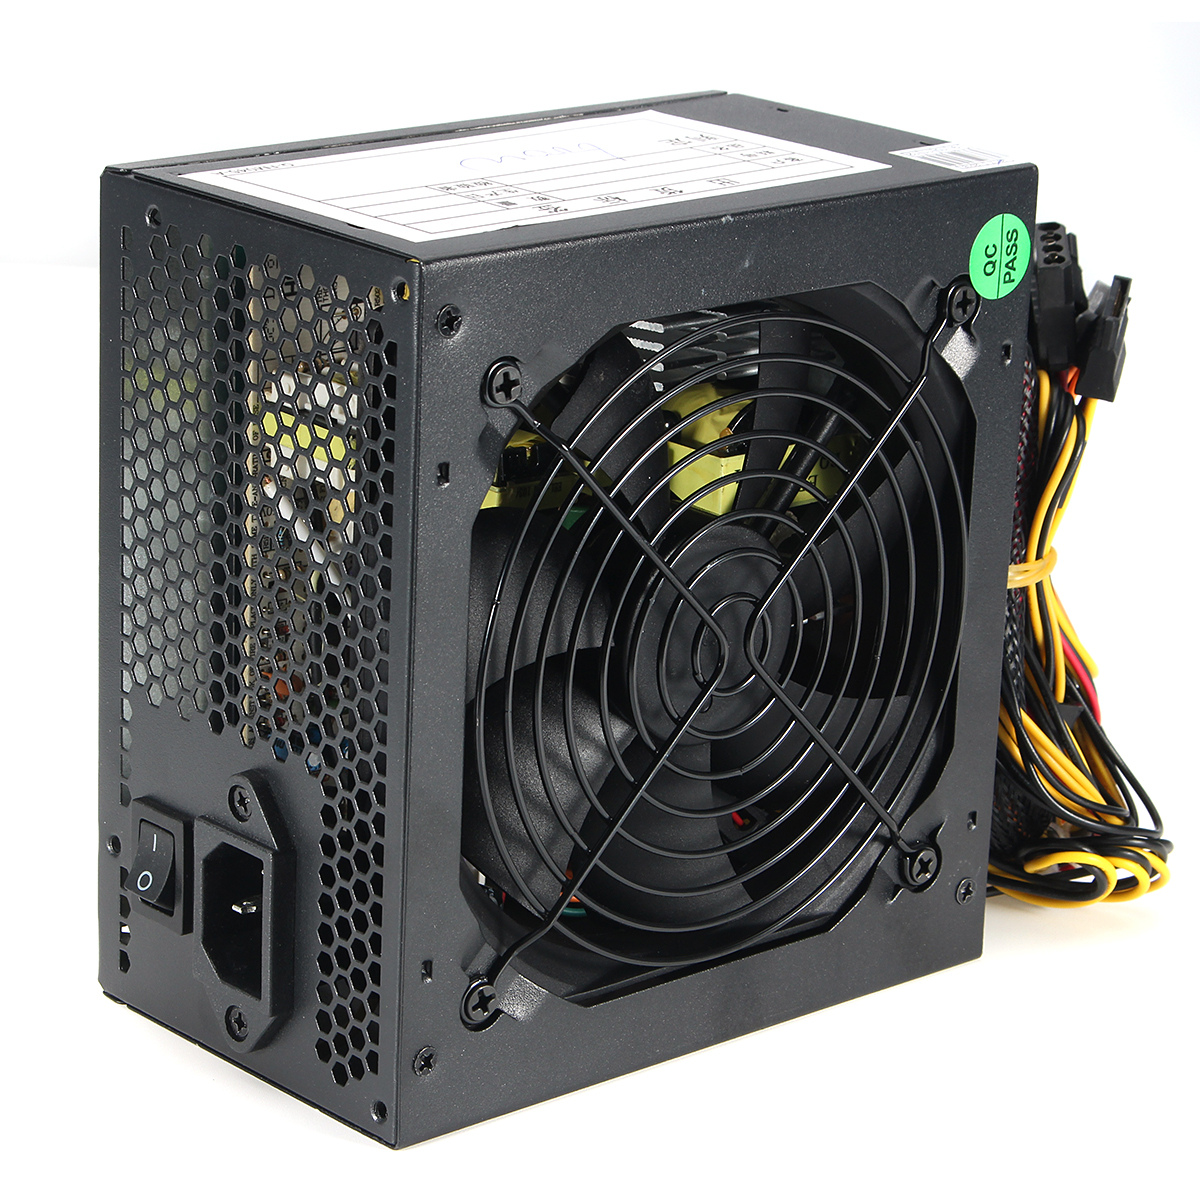 Find 600W PC Power Supply Quiet ATX 12V 24Pins 12CM Cooling Fan Desktop Computer Power Supply Gaming PSU for AMD Intel for Sale on Gipsybee.com with cryptocurrencies